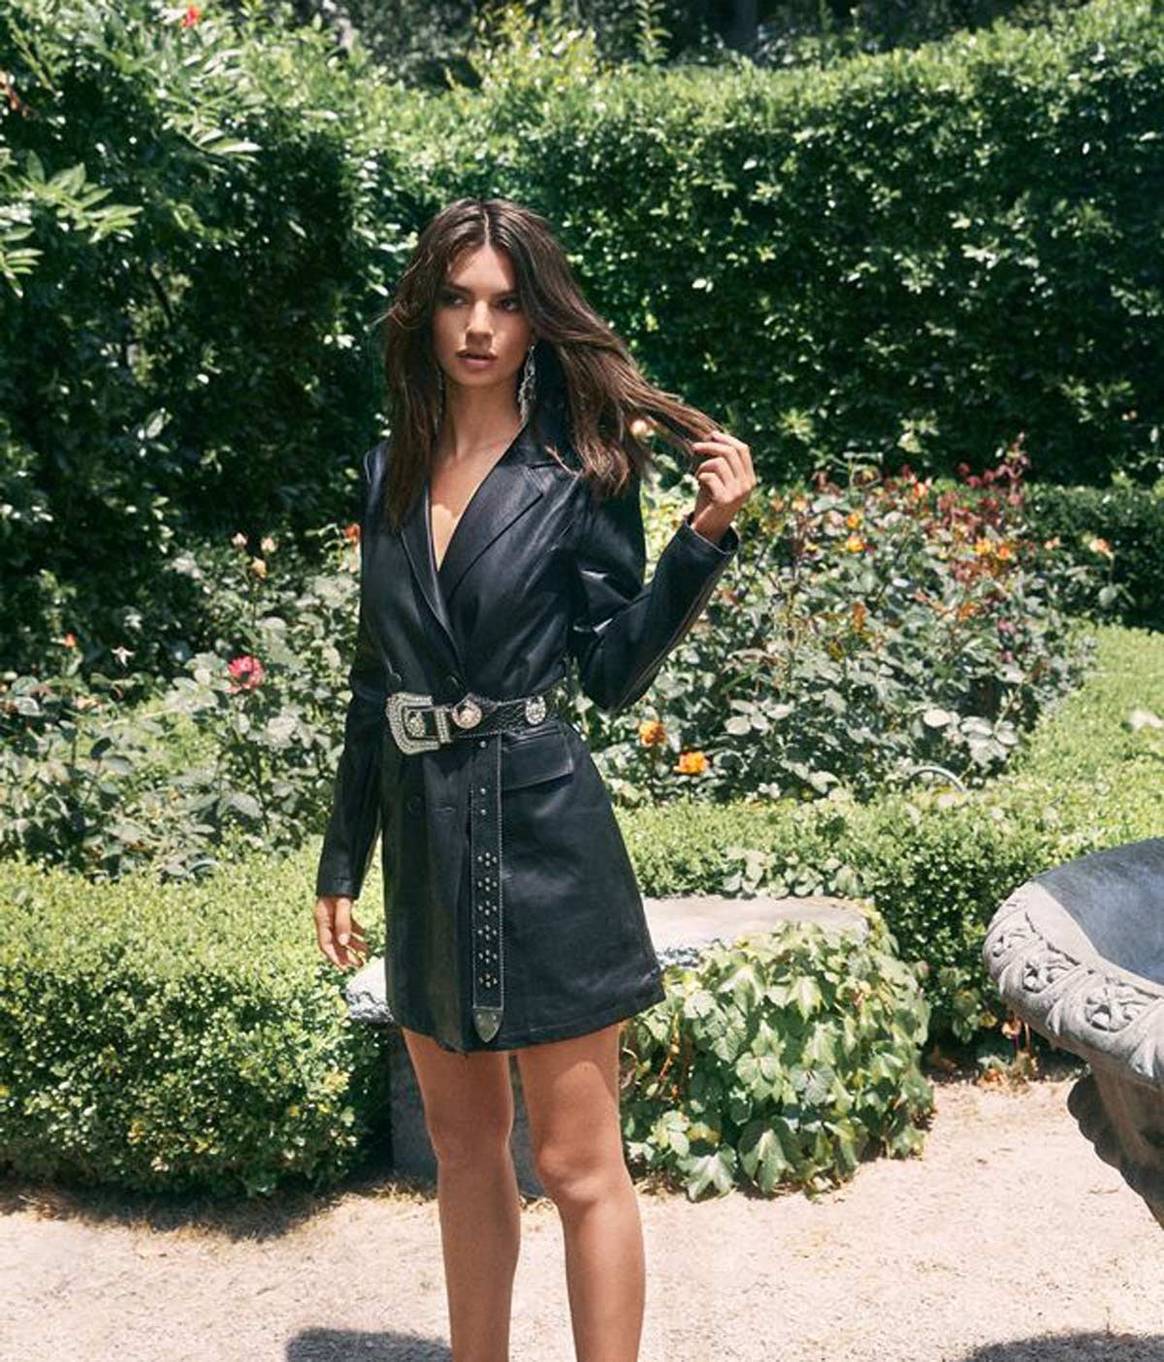 In pictures: Nasty Gal launches collection with Emily Ratajkowski